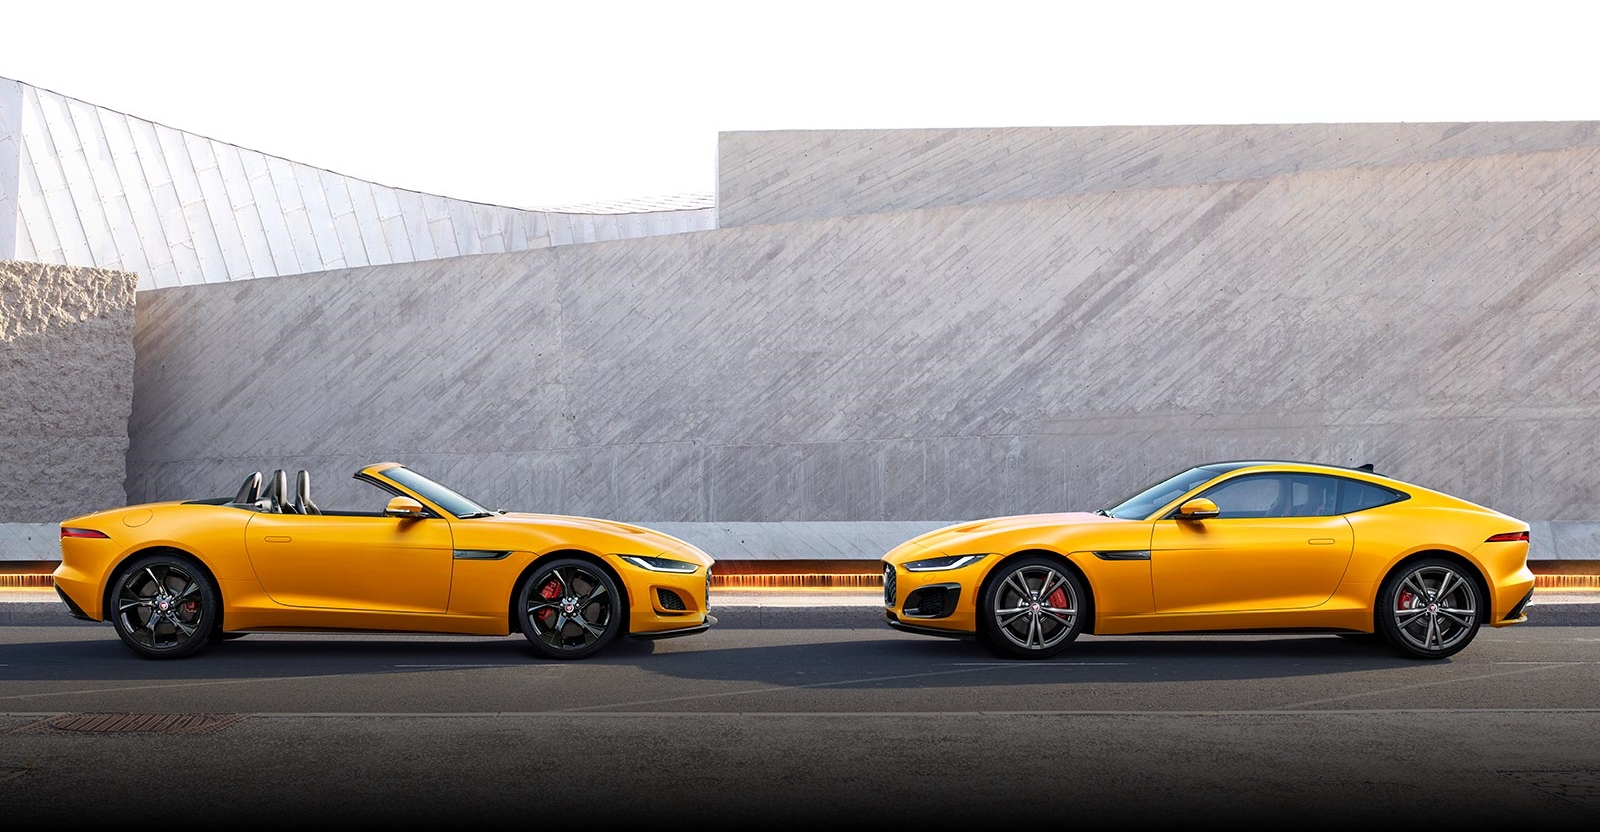 The Jaguar F Type is the newest and fastest incarnation of the Jaguar sports car, delivering more power and performance than ever. Shop a used Jaguar in Naples near you.